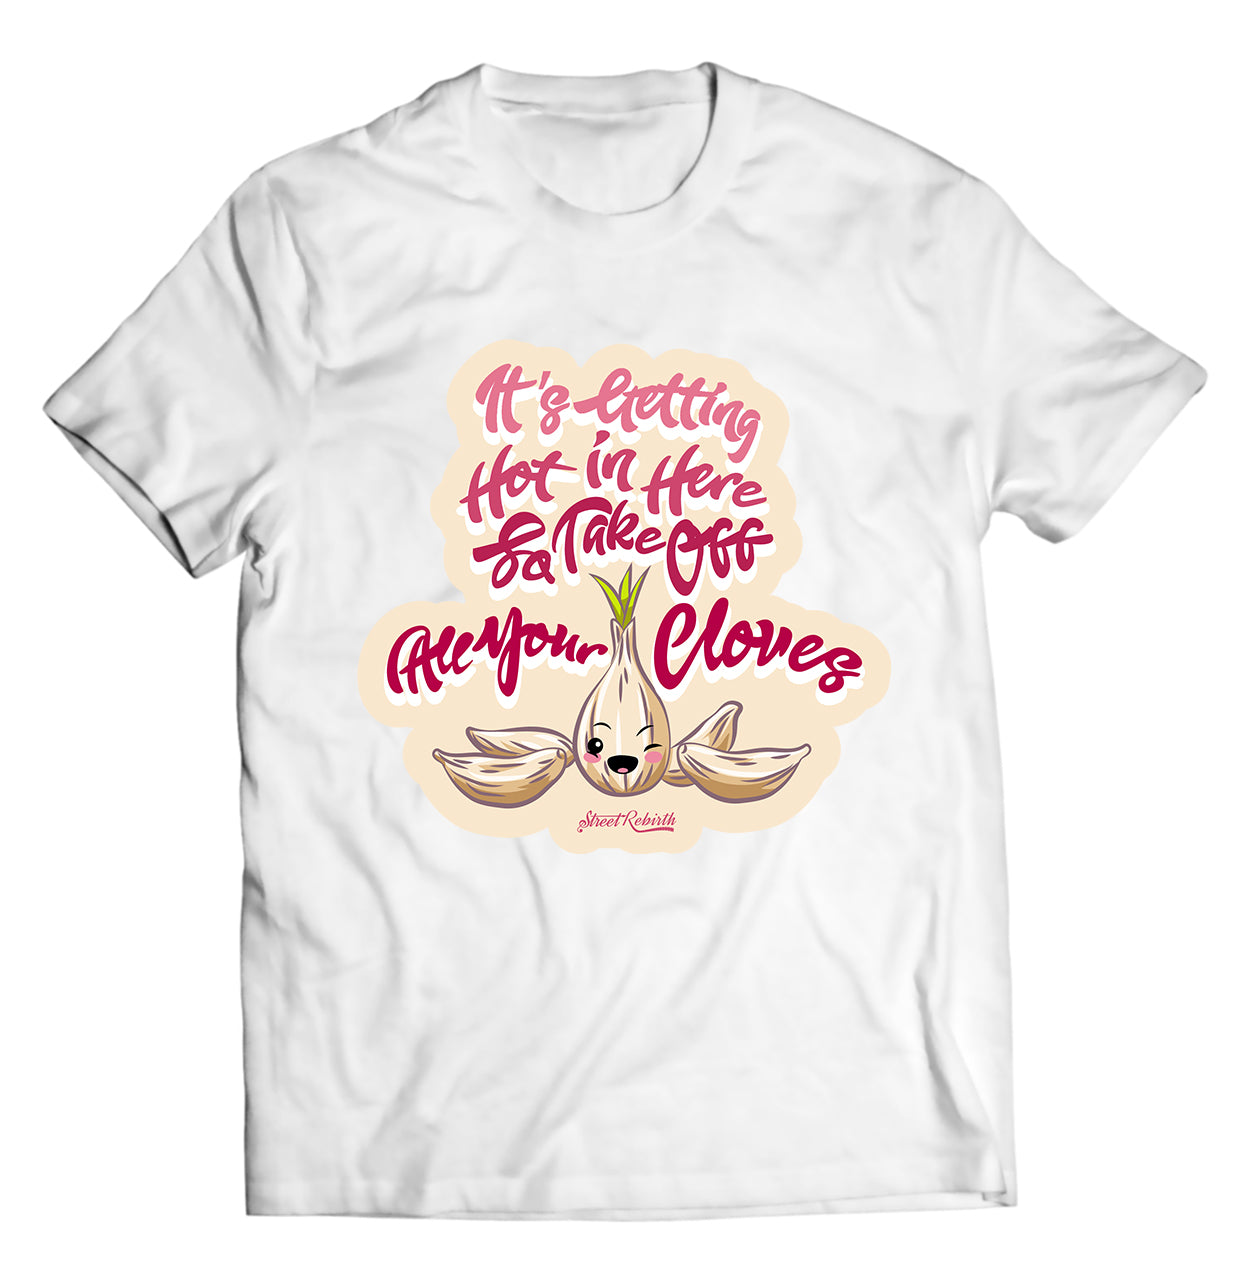 Take Off All Your Cloves PUN SHIRT - DIRECT TO GARMENT QUALITY PRINT - UNISEX SHIRT